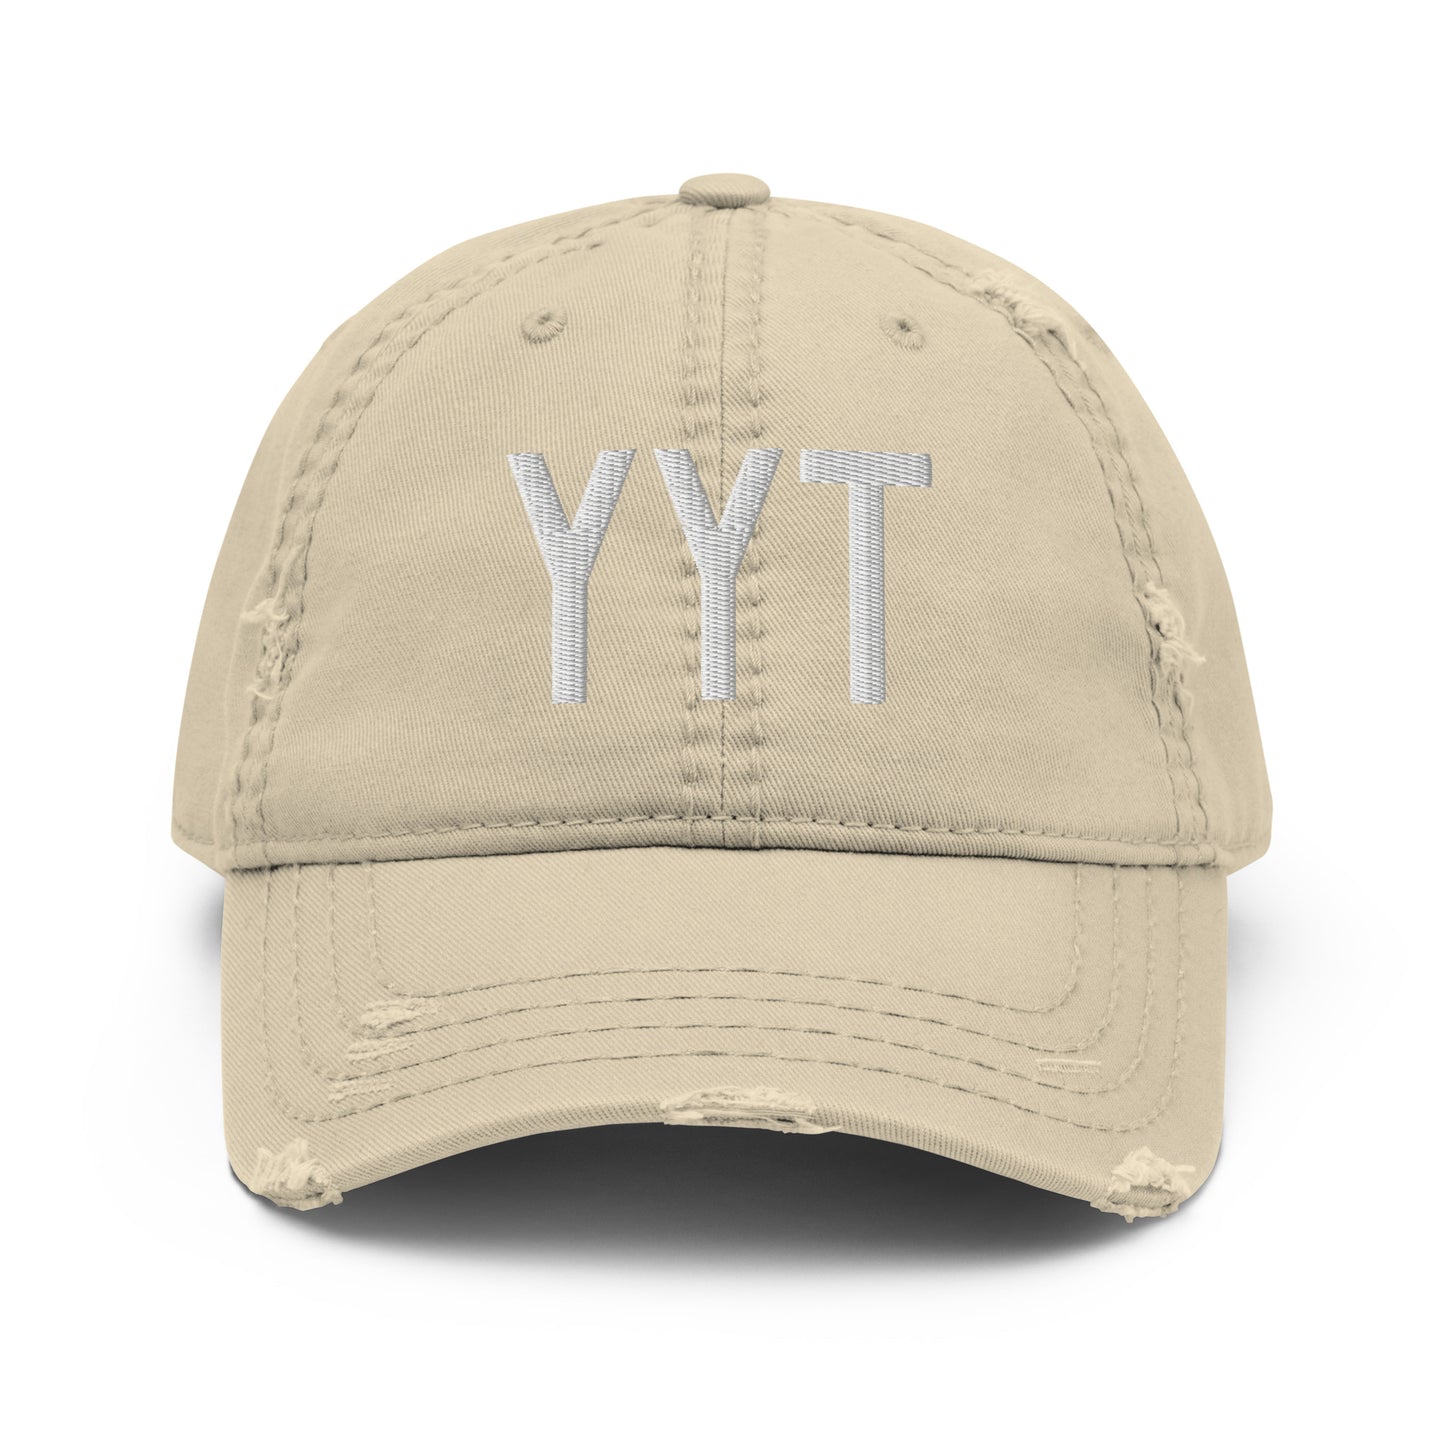 Airport Code Distressed Hat - White • YYT St. John's • YHM Designs - Image 18